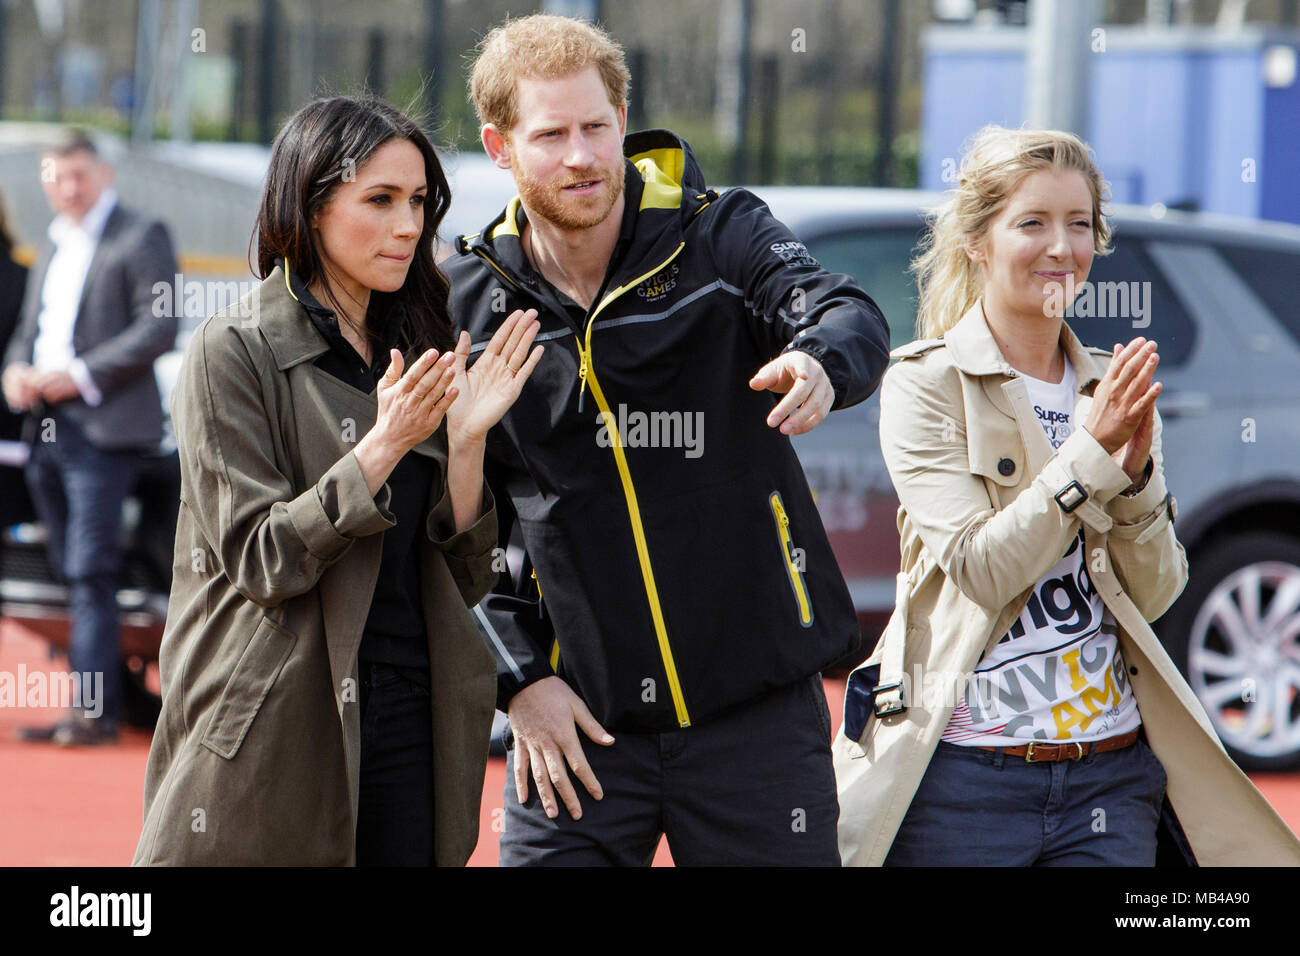 Bath, UK. 6th April, 2018. Prince Harry (centre), Meghan Markle (L) are pictured with the Invictus Games UK Team Chef de Mission Jayne Kavanagh (R) at the University of Bath Sports Training Village as they attend the UK team trials for the 2018 Invictus Games. The games are a sporting event for injured active duty and veteran service members, 500 competitors from 18 nations will compete in 11 adaptive sports in this year's Invictus Games which will be held in Sydney, Australia in October 2018. Credit: lynchpics/Alamy Live News Stock Photo